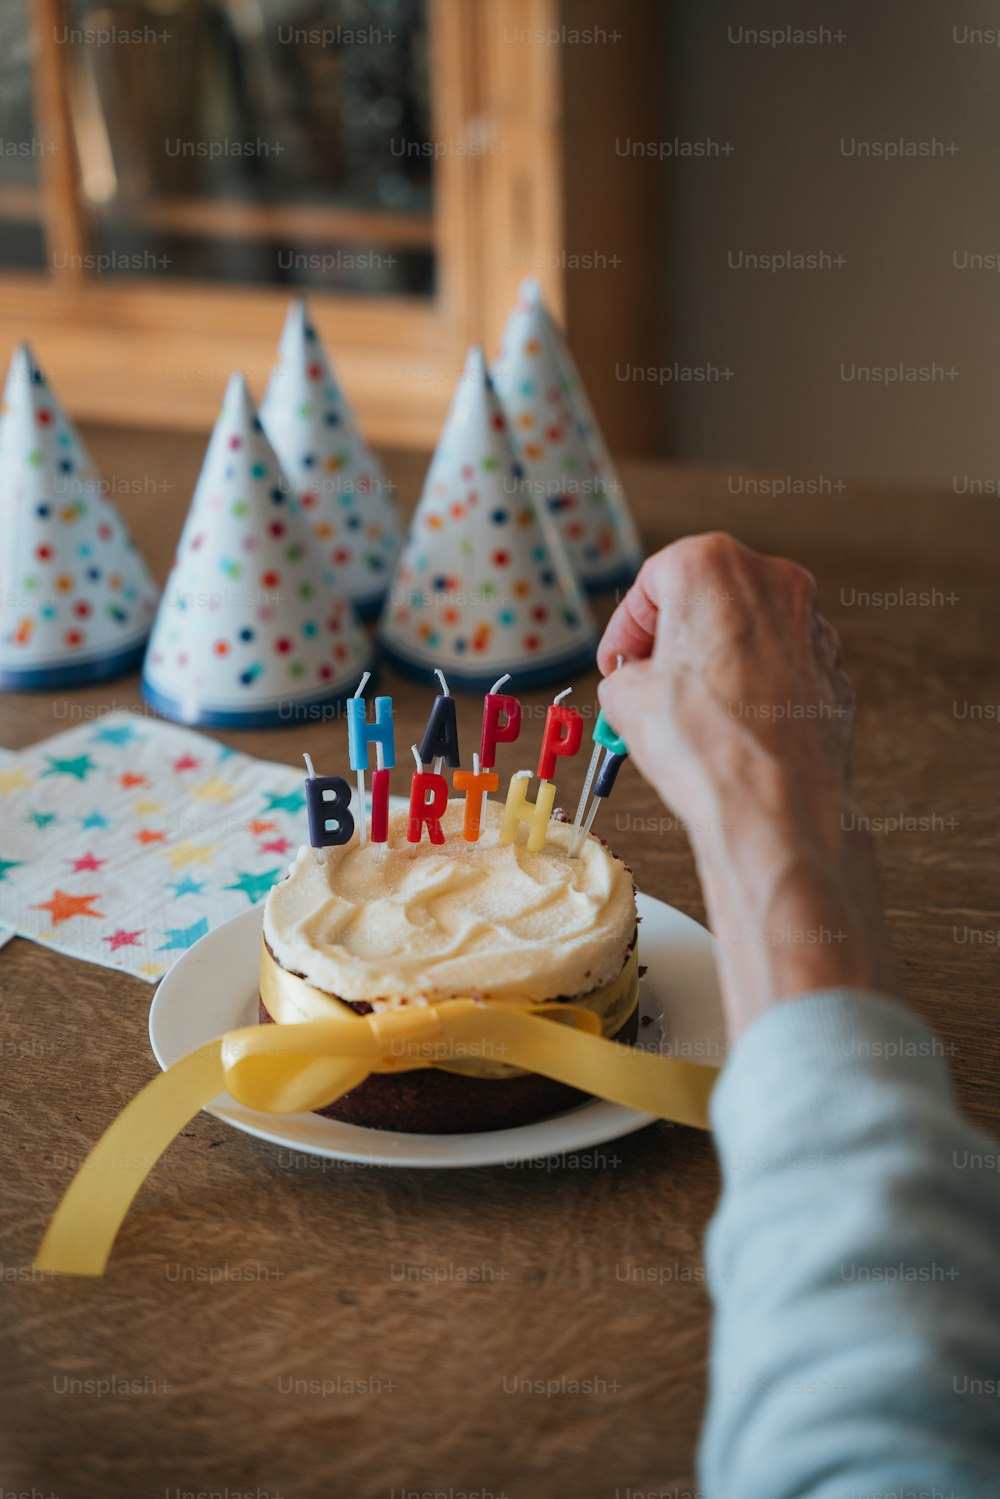 a person is holding a birthday cake with candles